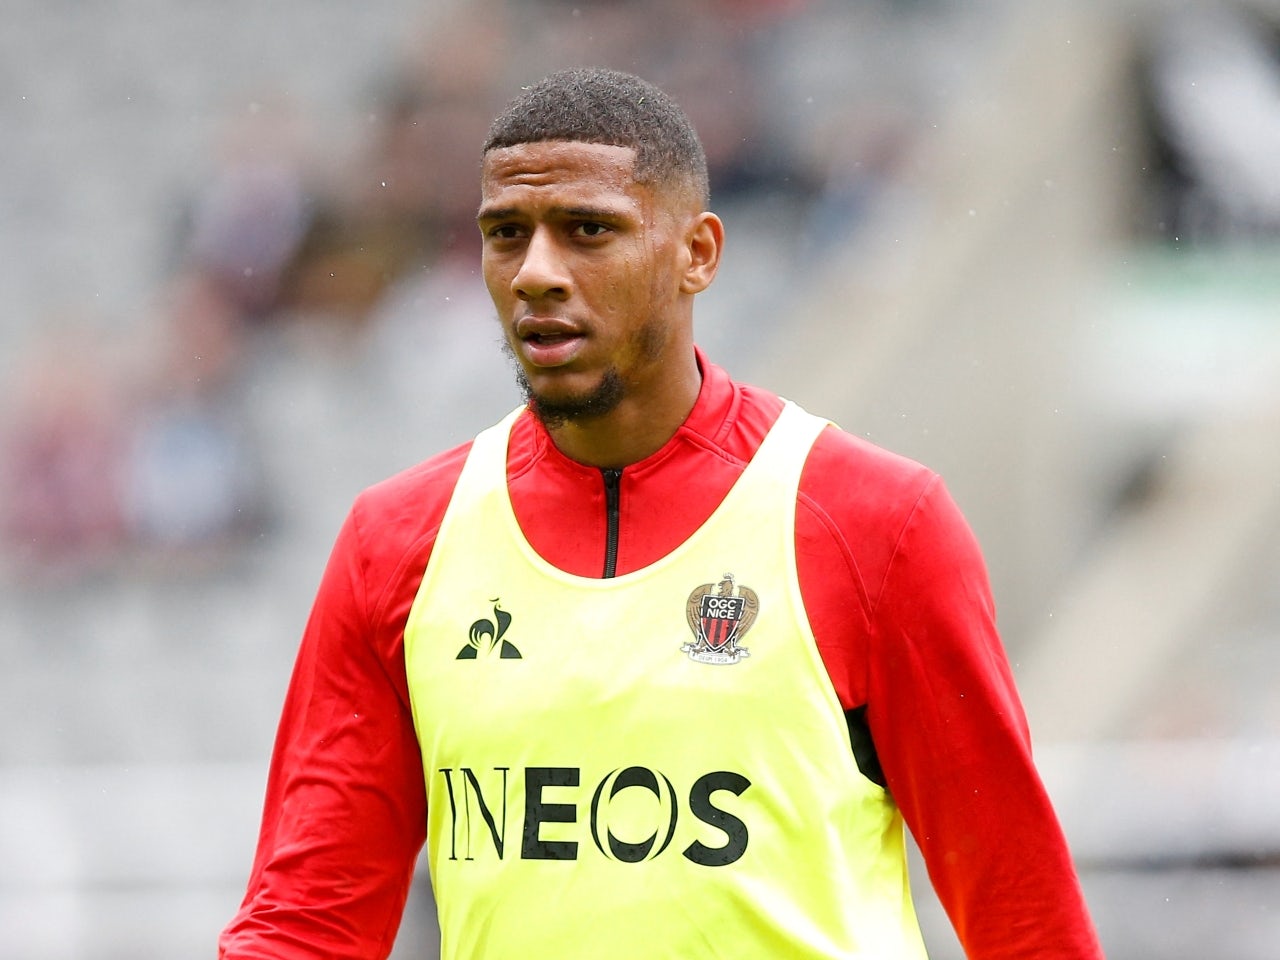 Manchester United 'appoint Swiss lawyer' in bid to sign Jean-Clair Todibo